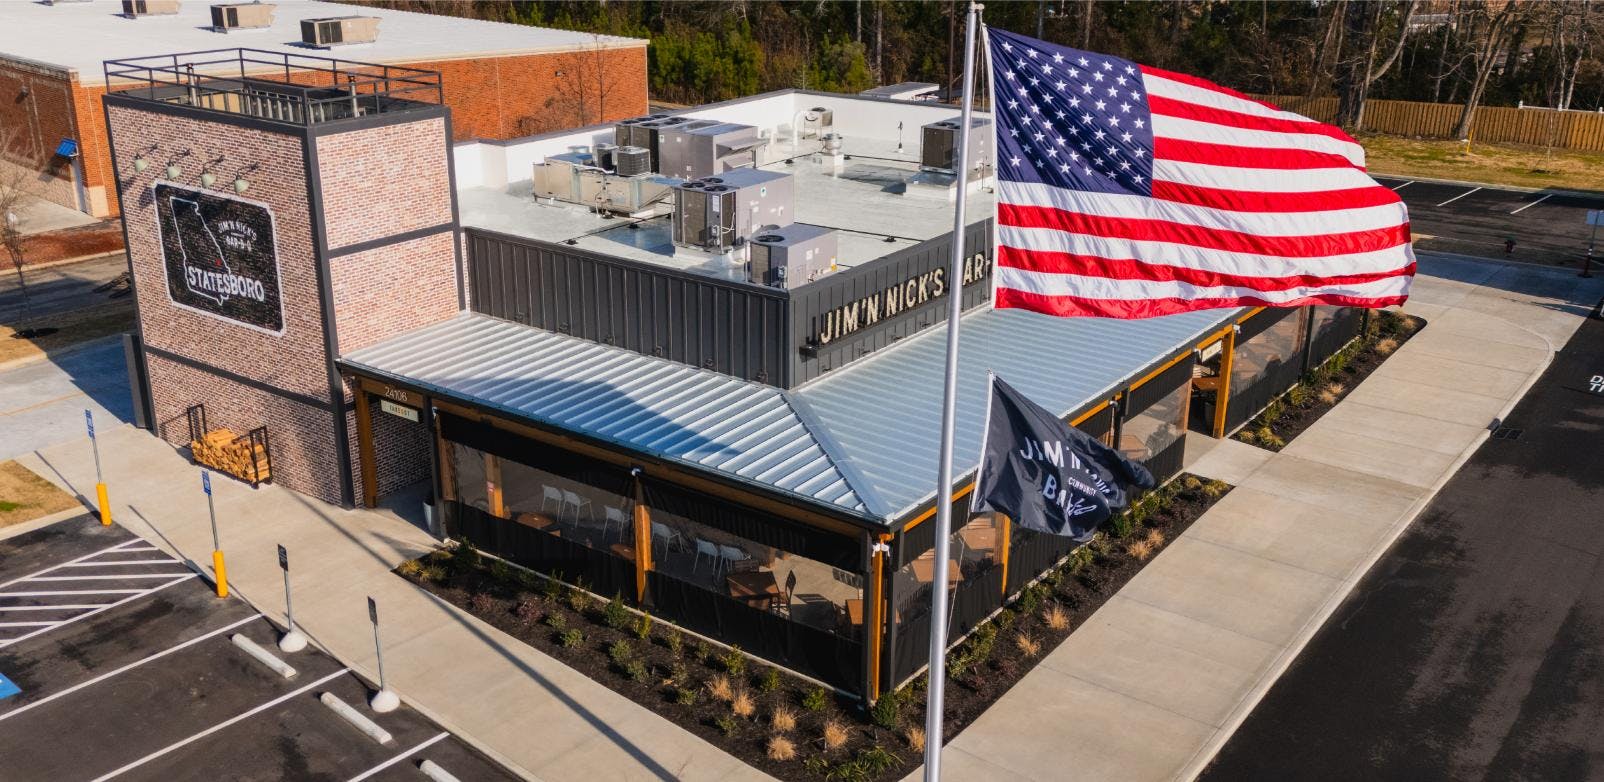 Jim 'n Nicks BBQ Restaurant Roof | Flat Roofing | Low Slope Roofing | Metal Roofing | Commercial Standing Seam Metal Roof | Commercial Roofing Solutions | Bulloch County Commercial Roofers | New Construction Commercial Roofer